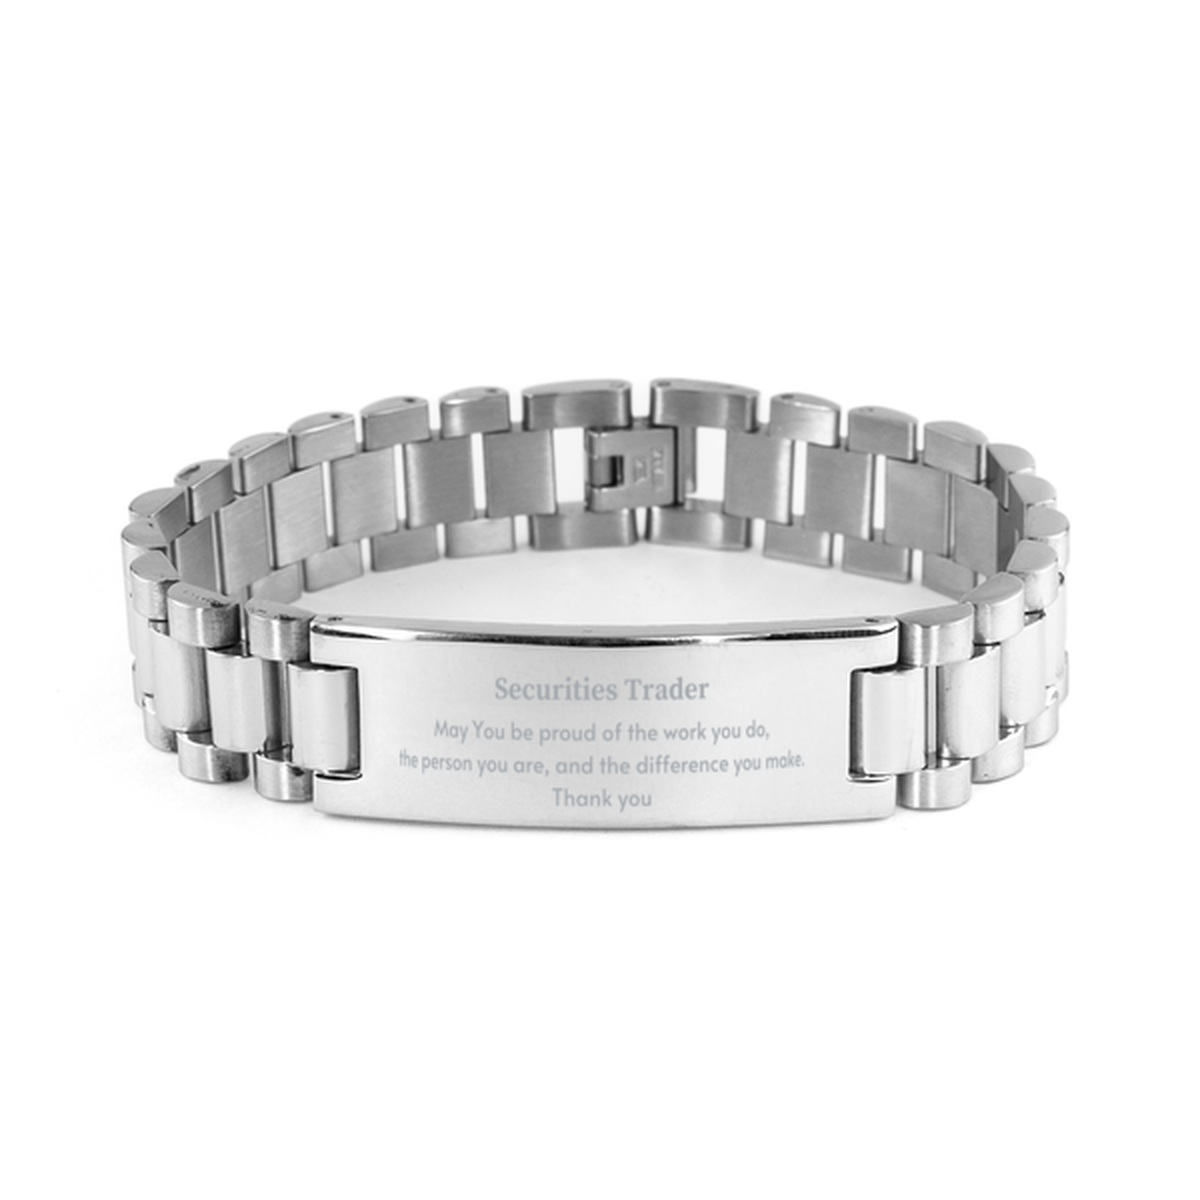 Heartwarming Ladder Stainless Steel Bracelet Retirement Coworkers Gifts for Securities Trader, Securities Trader May You be proud of the work you do, the person you are Gifts for Boss Men Women Friends